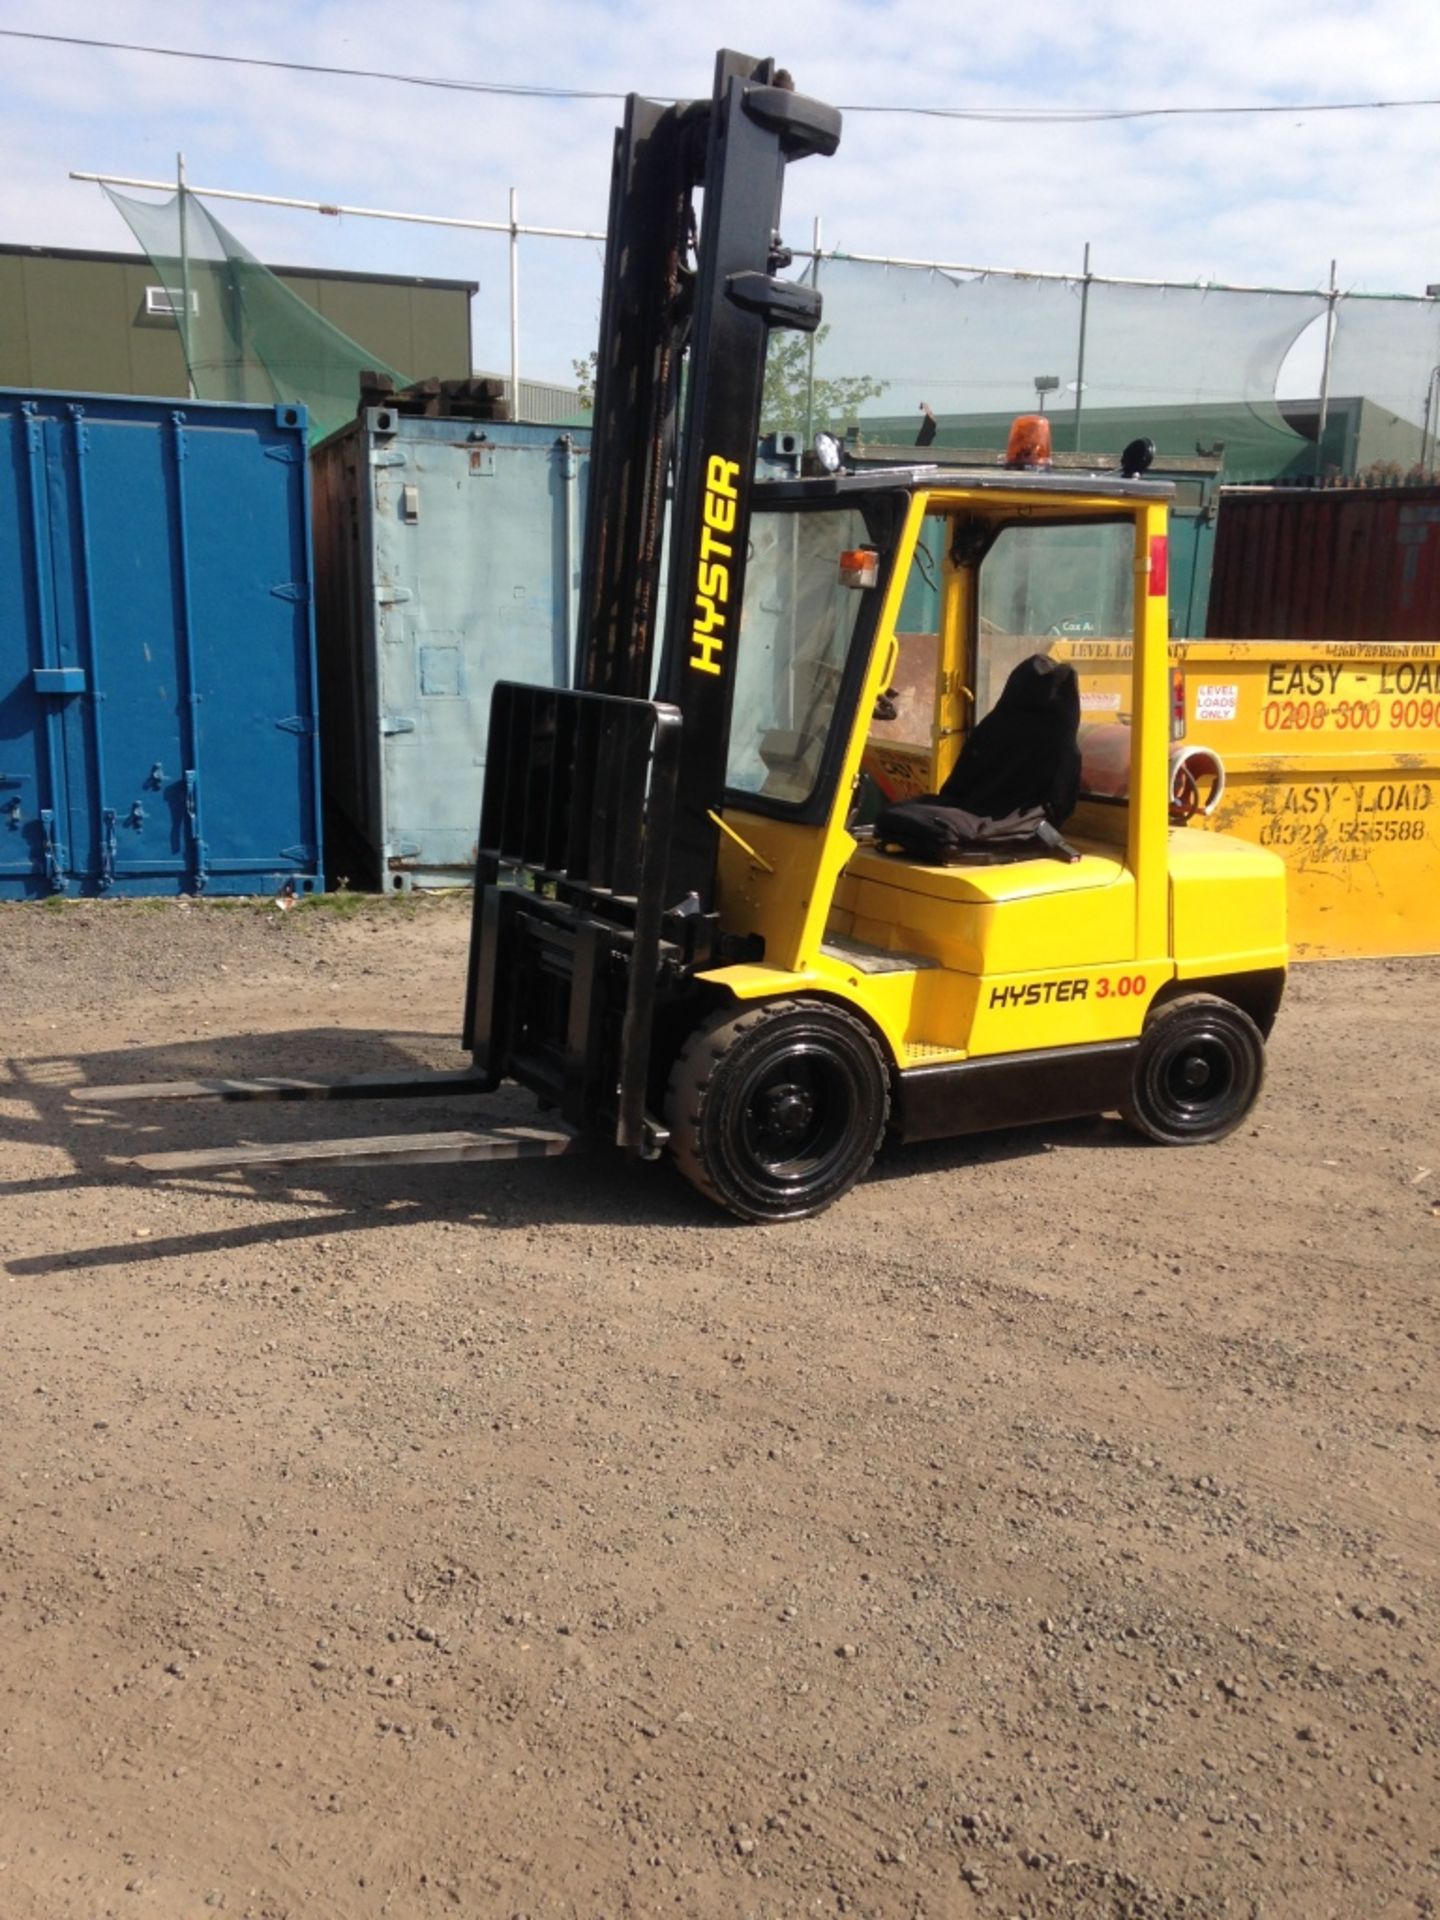 Hyster 3.00 gas forklift - Image 4 of 4